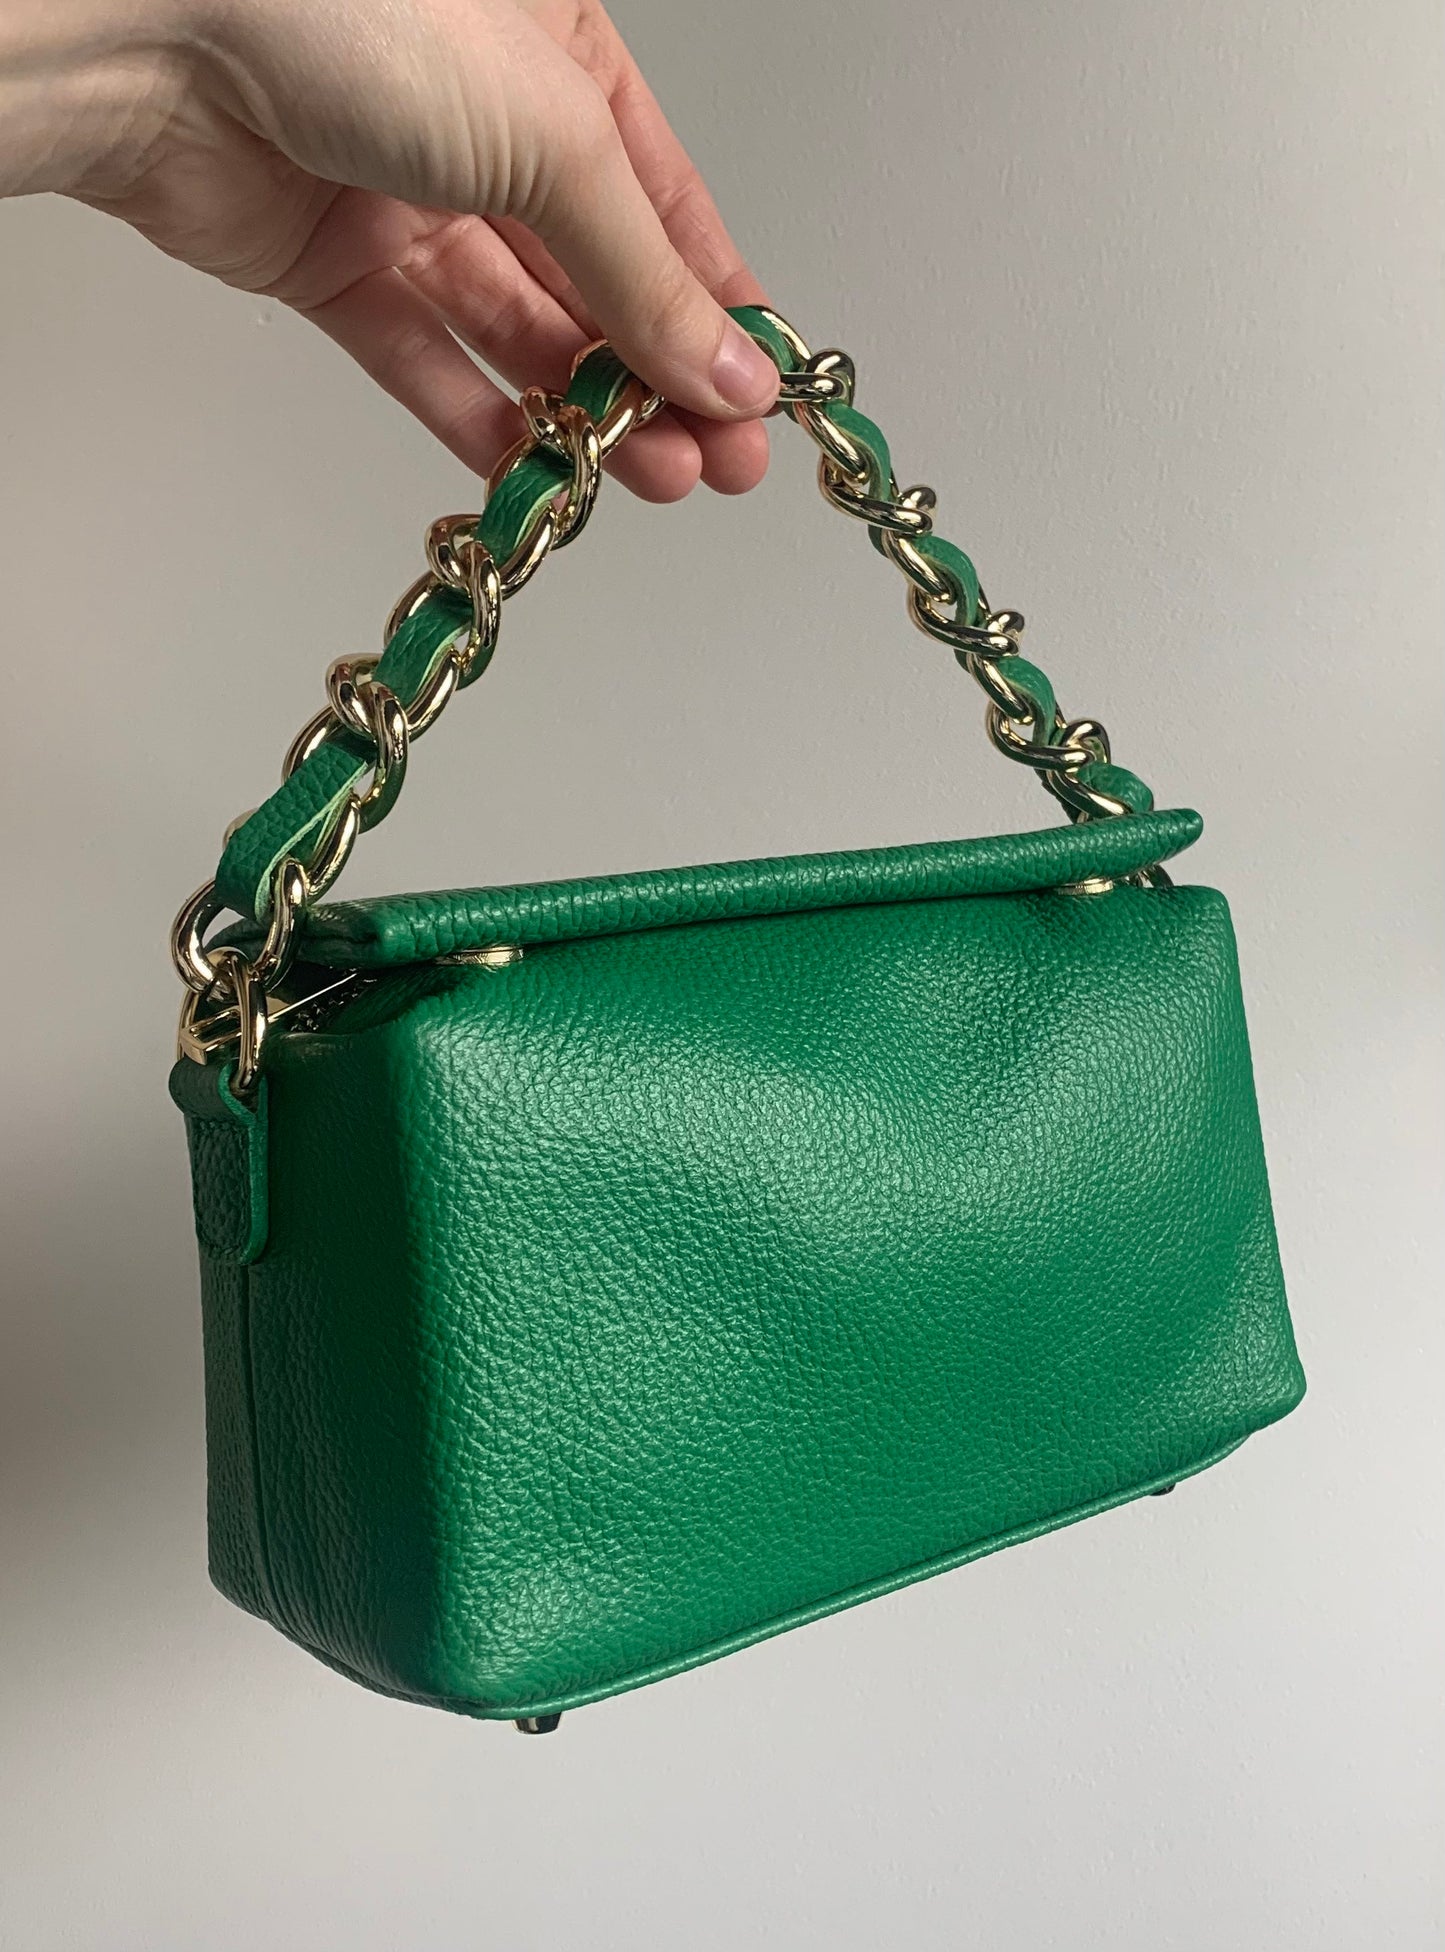 Green Boxy Bag With Chain Handle